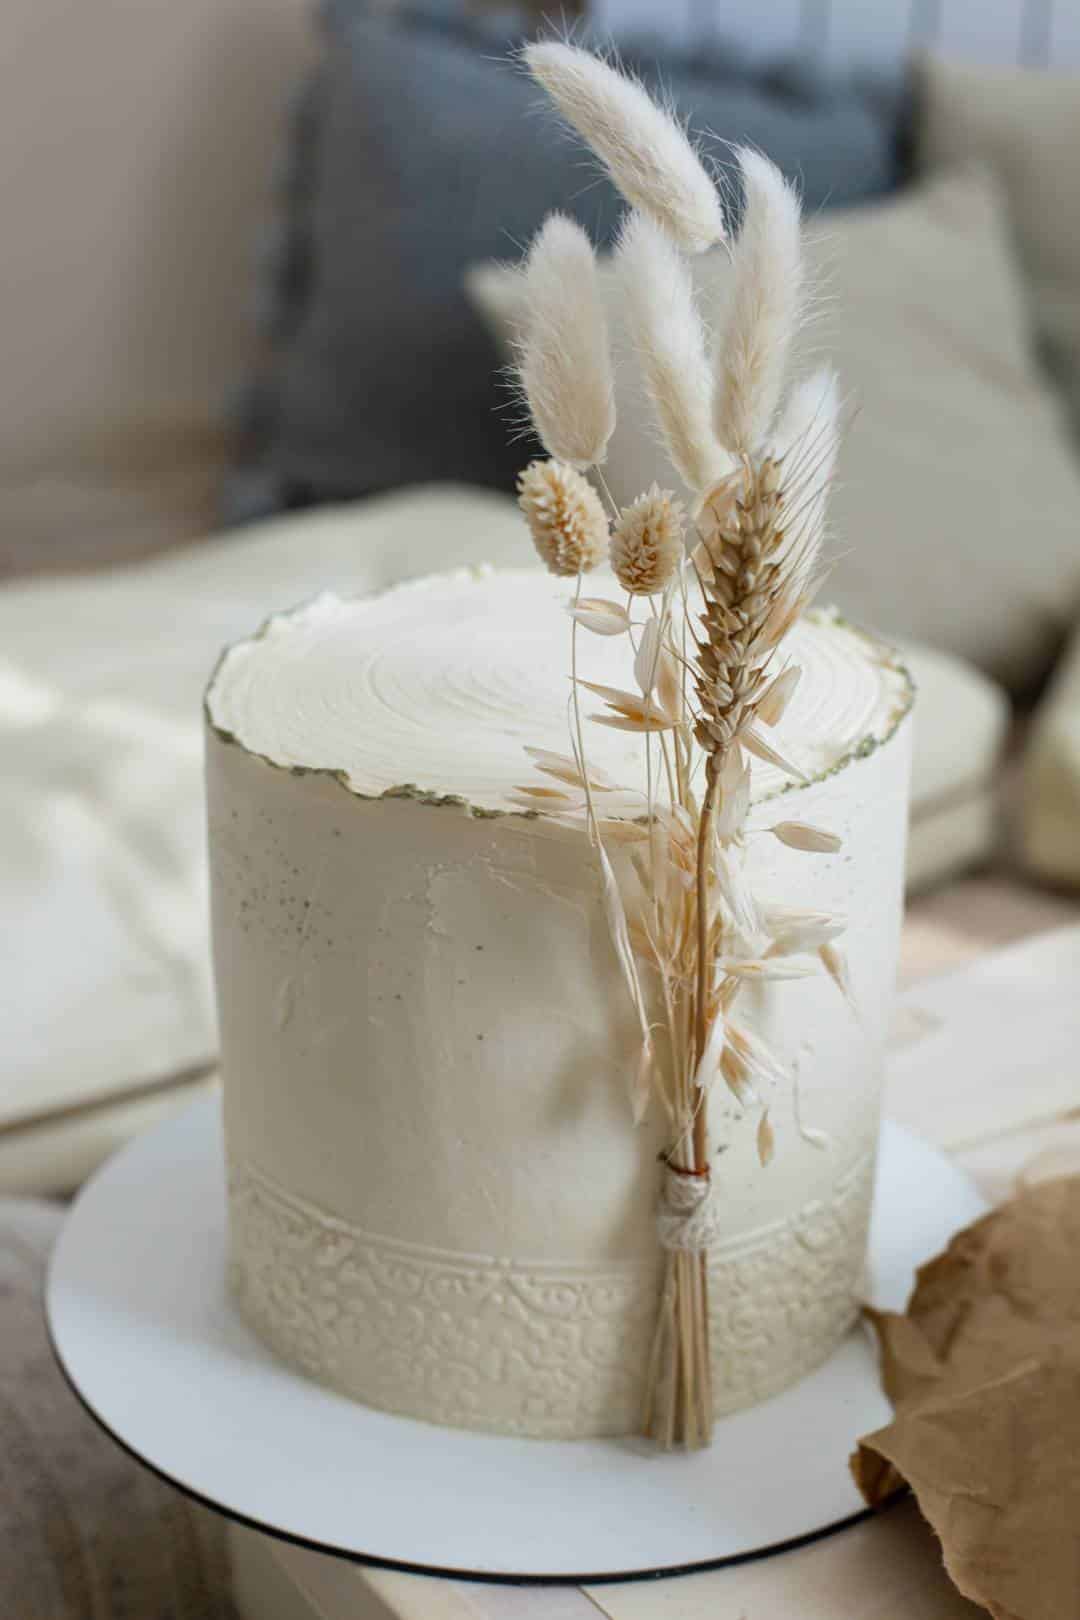 Wedding cake decorated with dry ear of wheat cotton in boho style